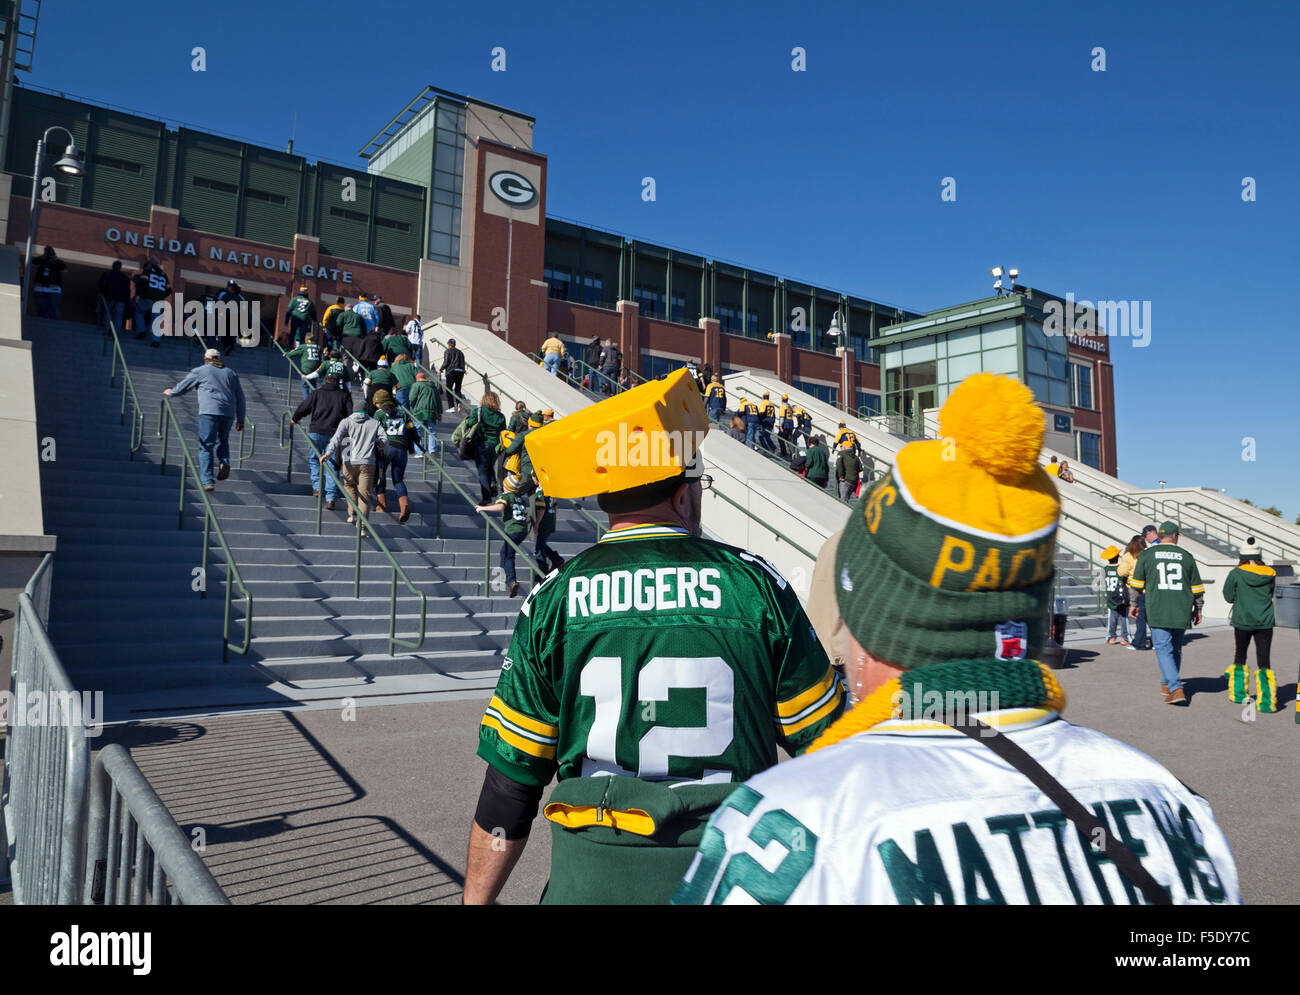 Lambeau Field in Green Bay, Wisconsin is home to the NFL football team Green Bay Packers. Stock Photo